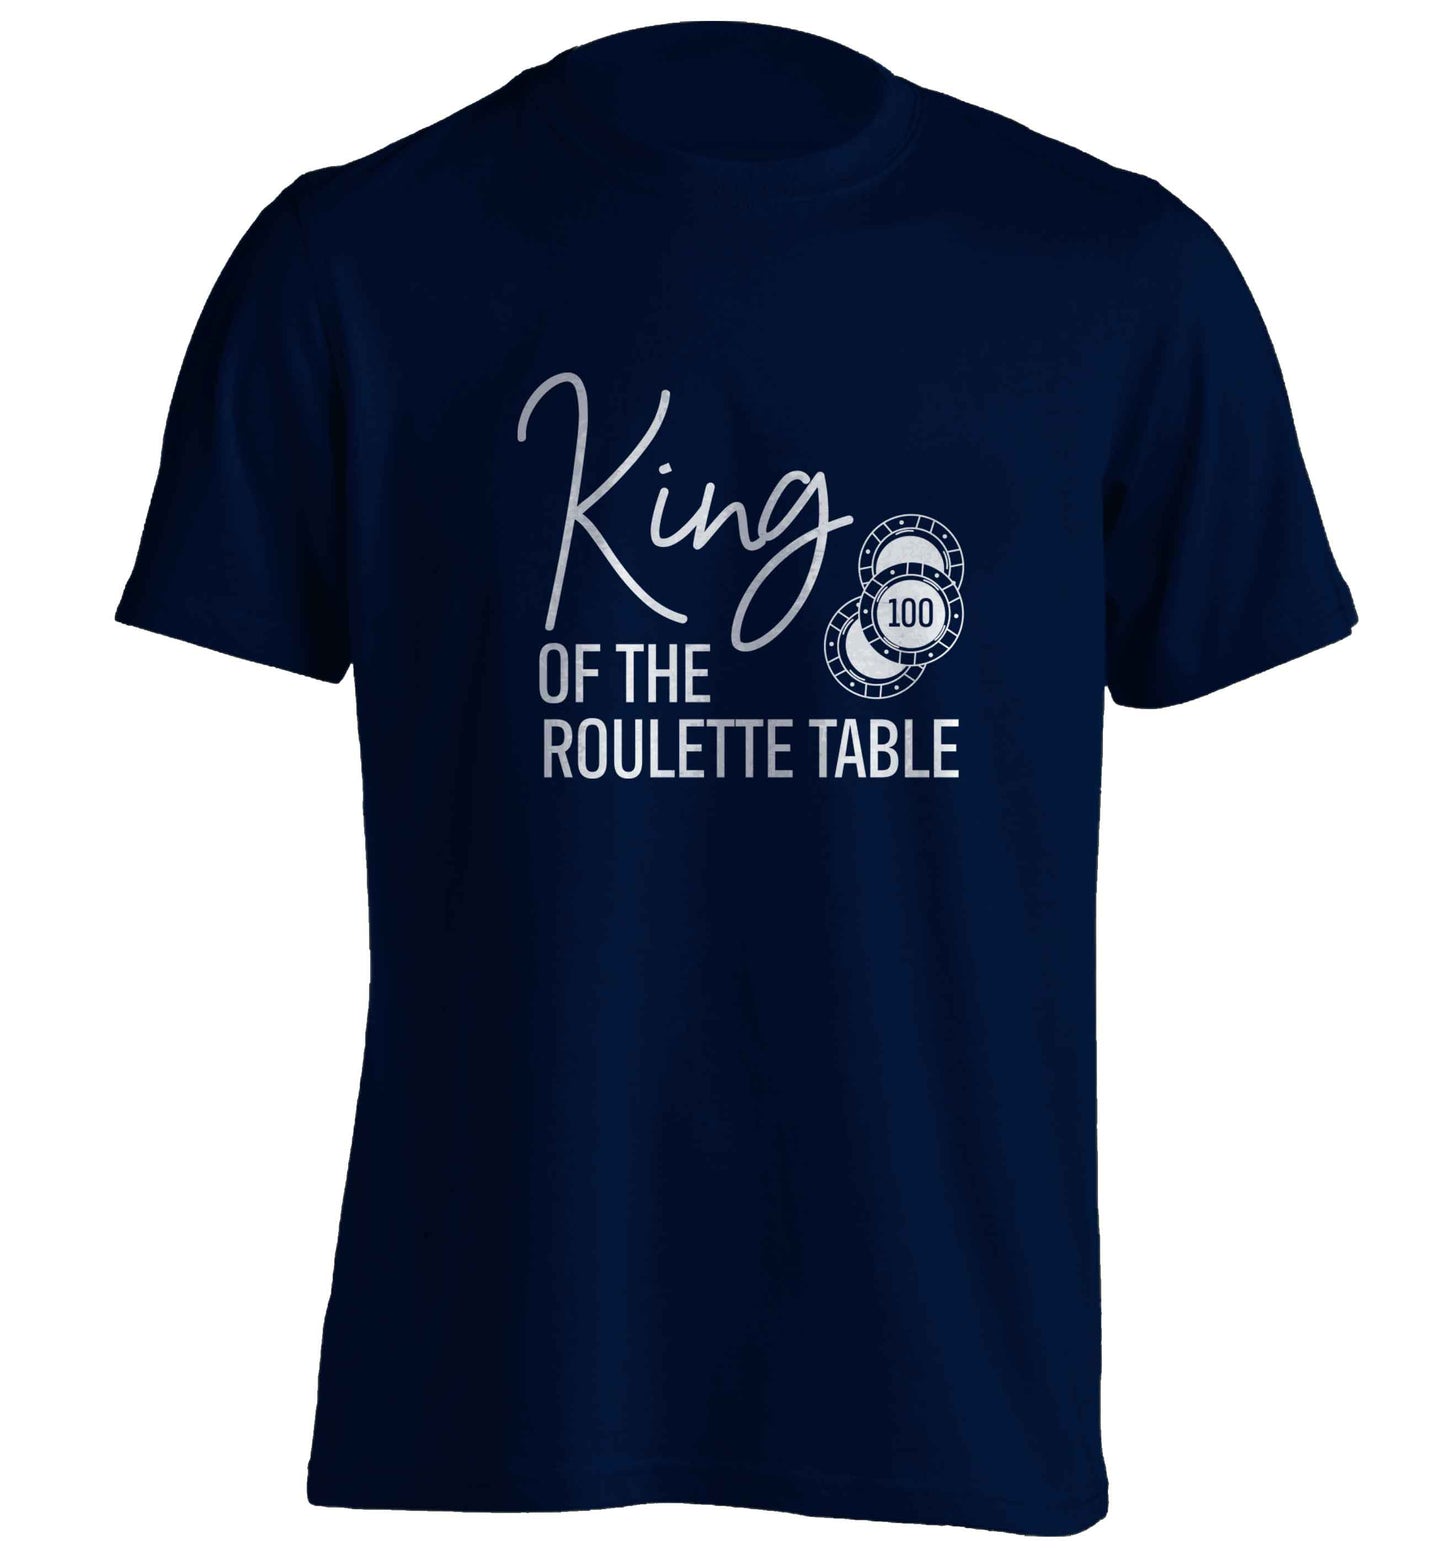 King of the roulette table adults unisex navy Tshirt 2XL